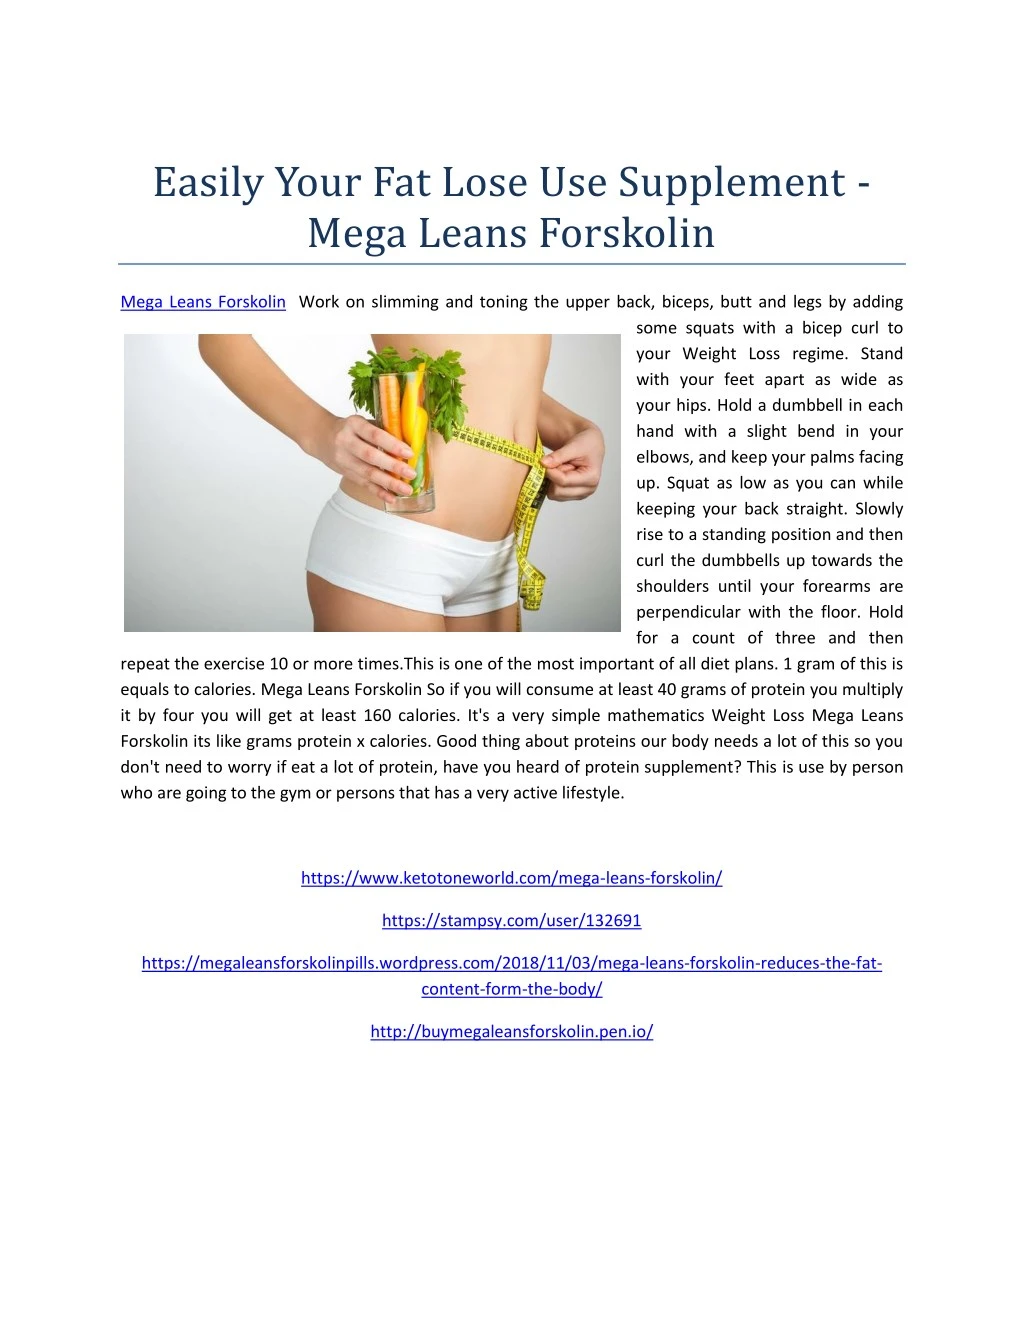 easily your fat lose use supplement mega leans